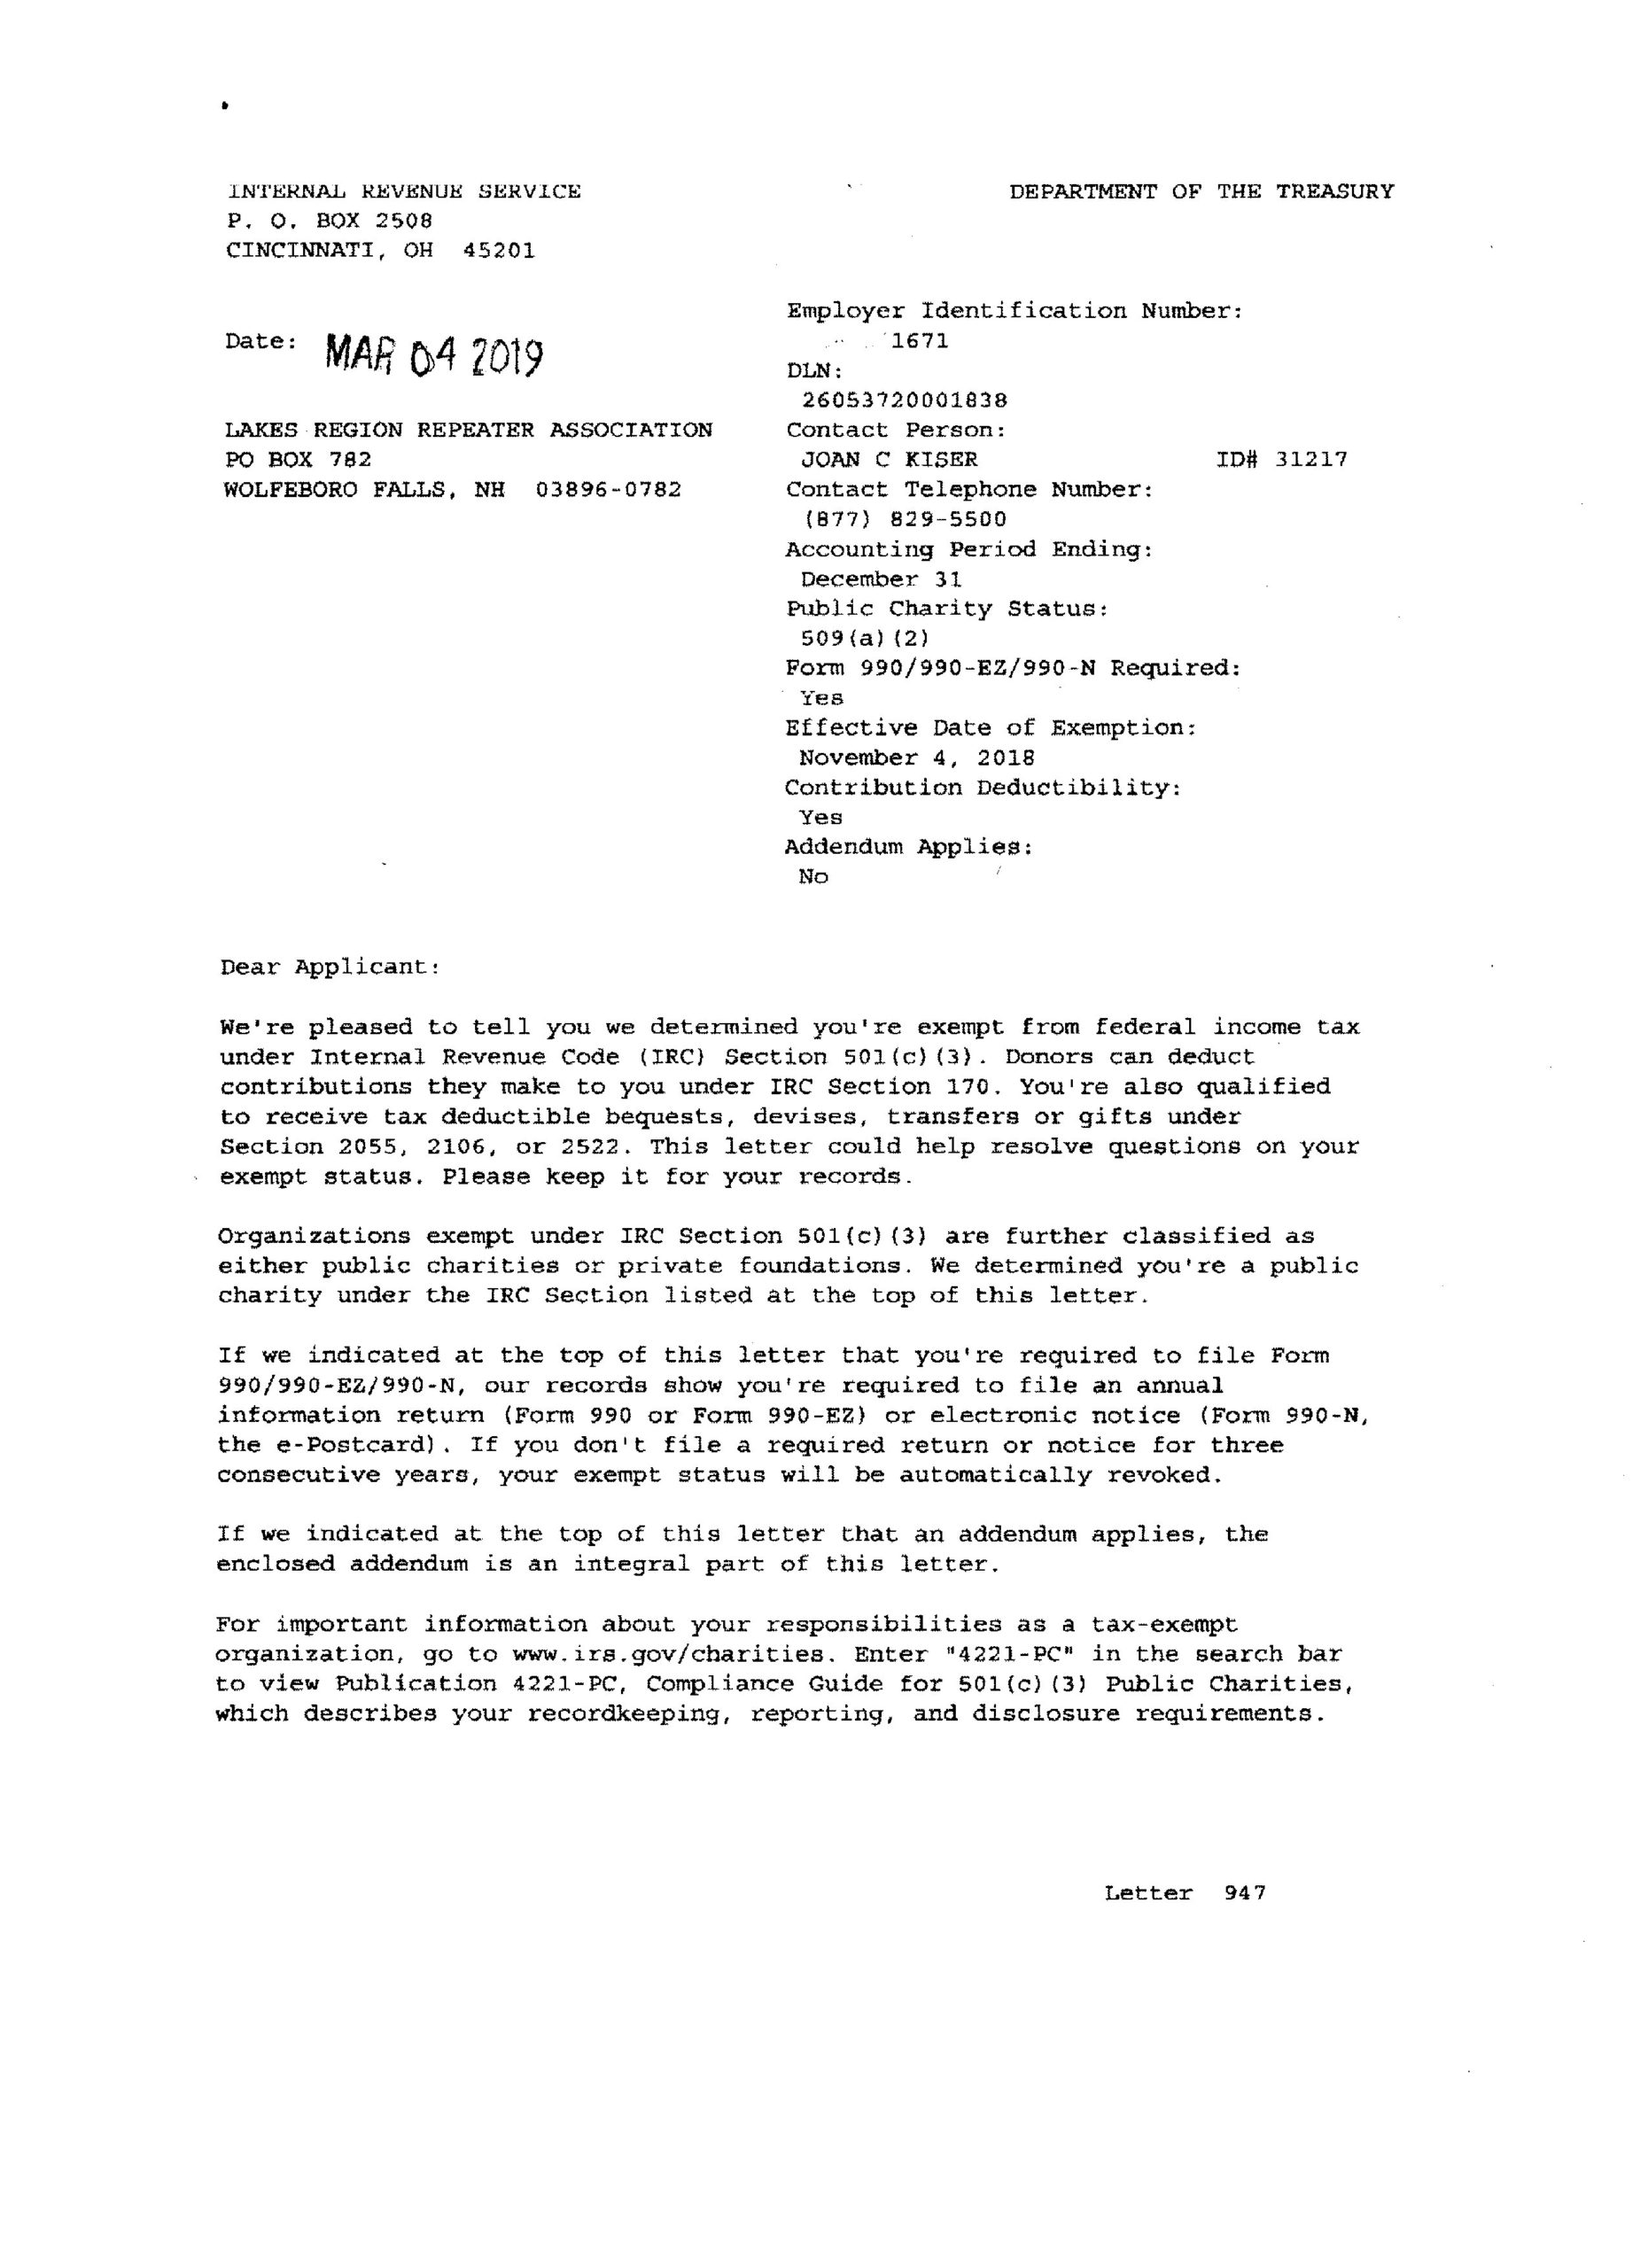 irs determination letter